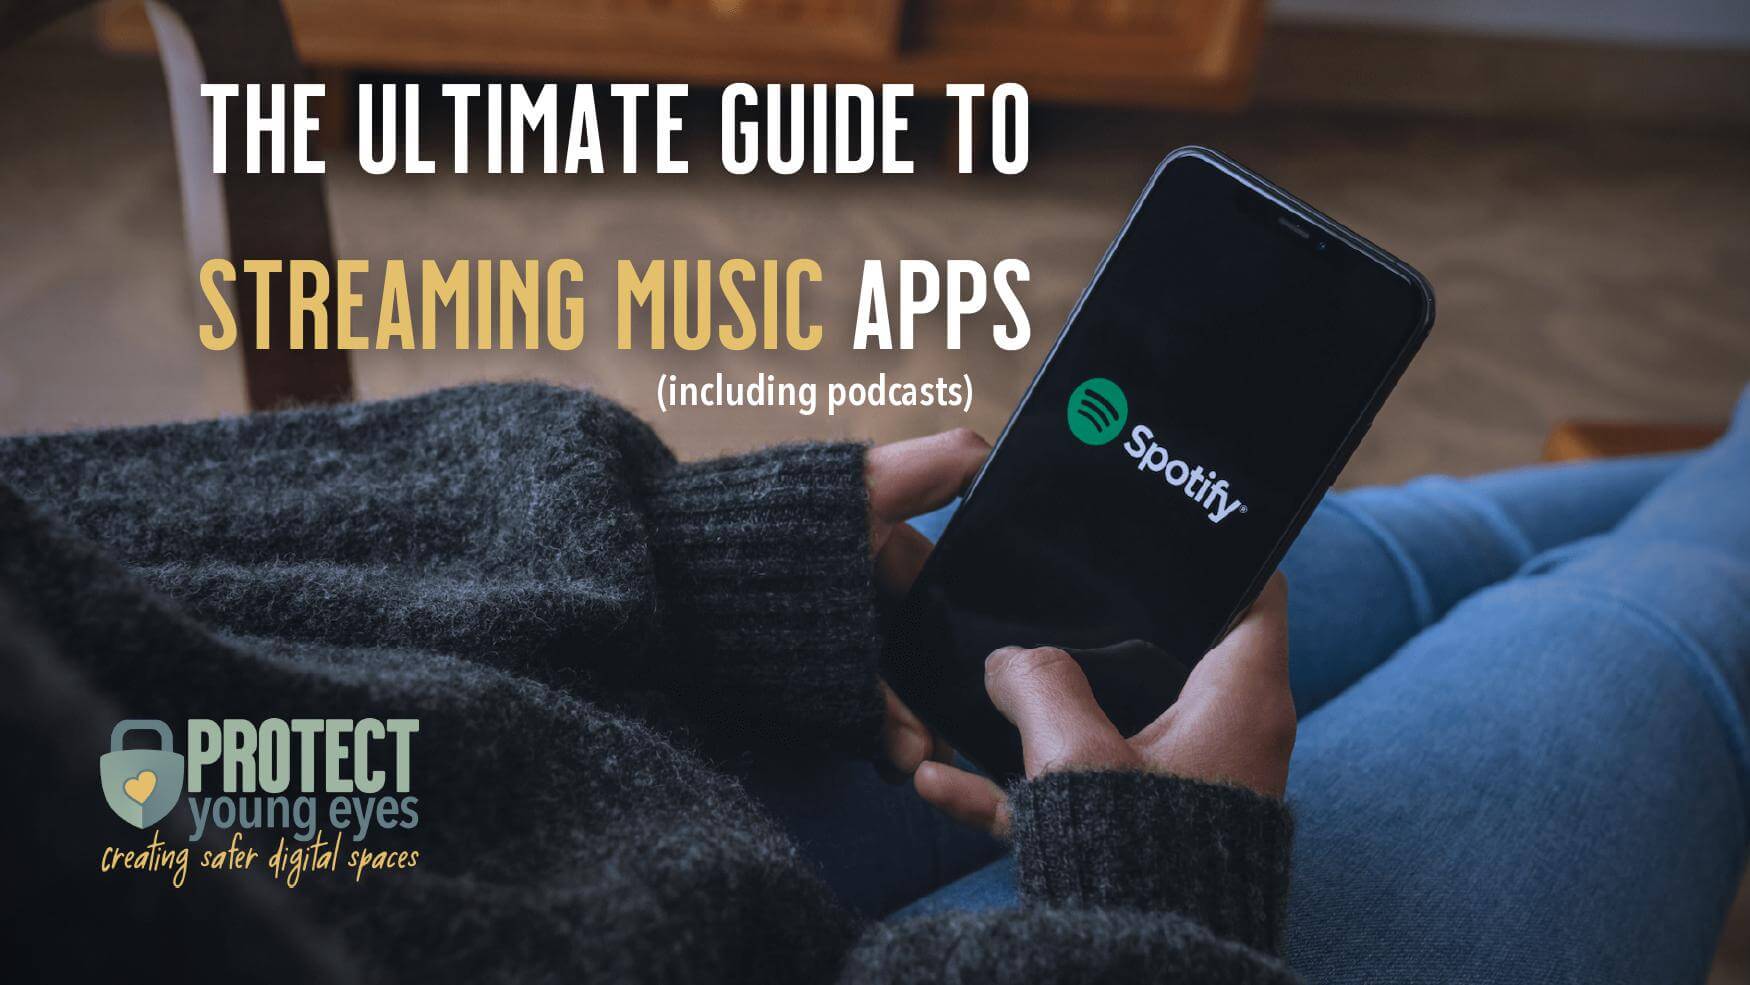 Spotify Makes Podcast Ads Unskippable by Sticking Them in App